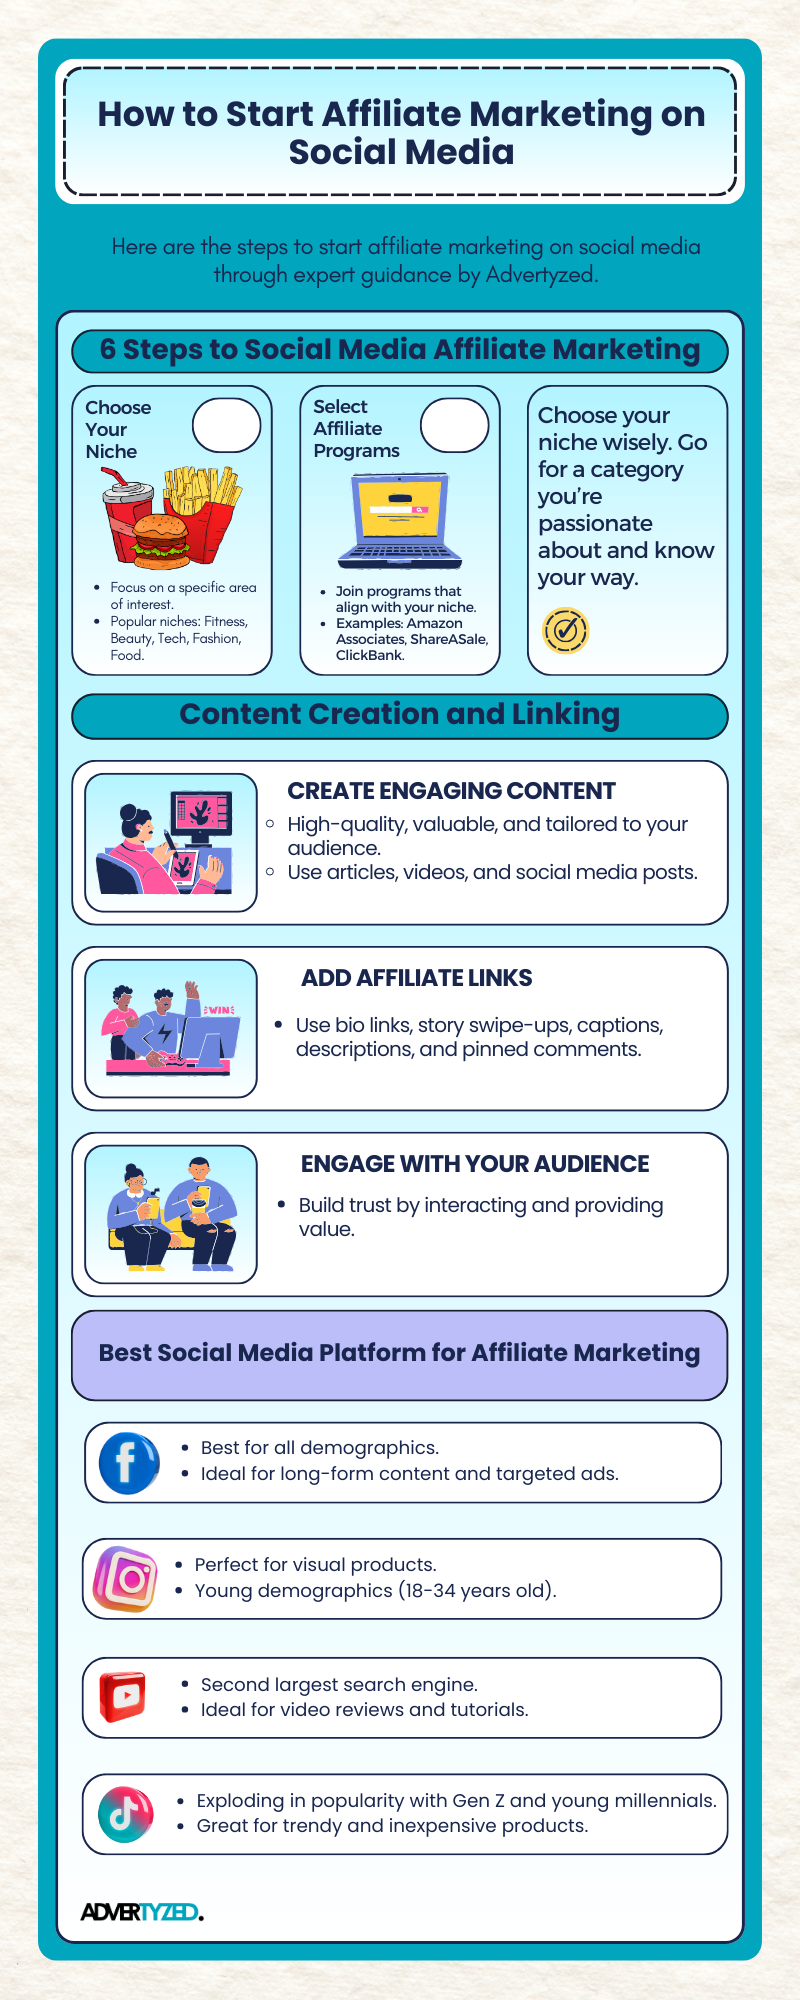 Advertyzed tips for social media affiliate marketing